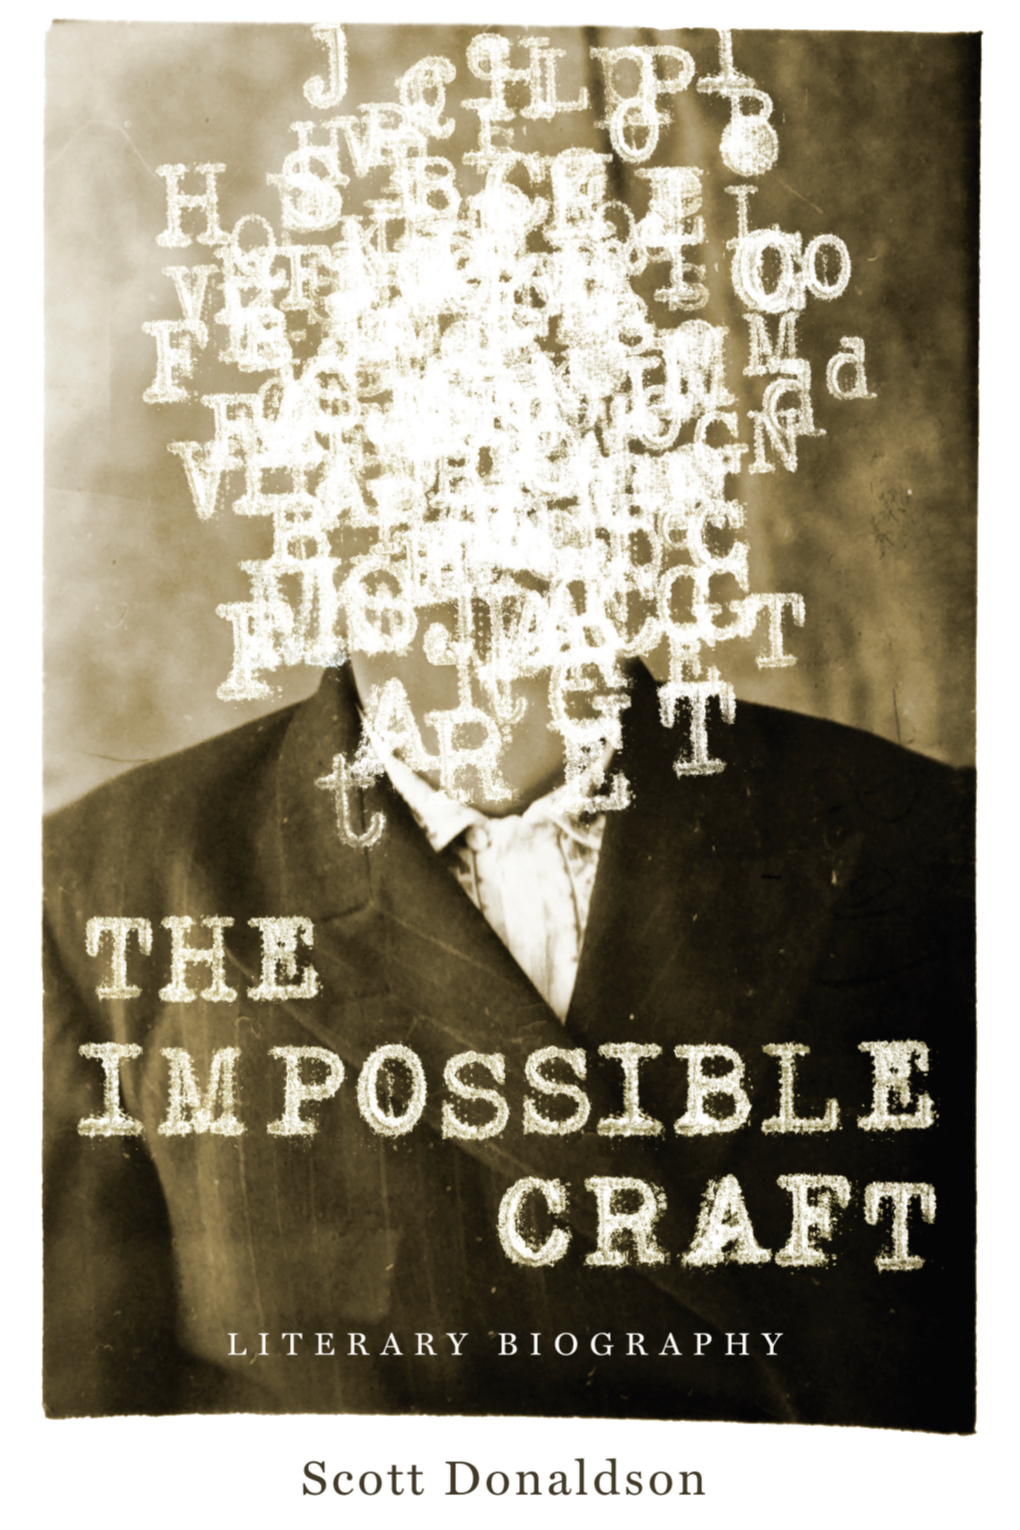 The Impossible Craft